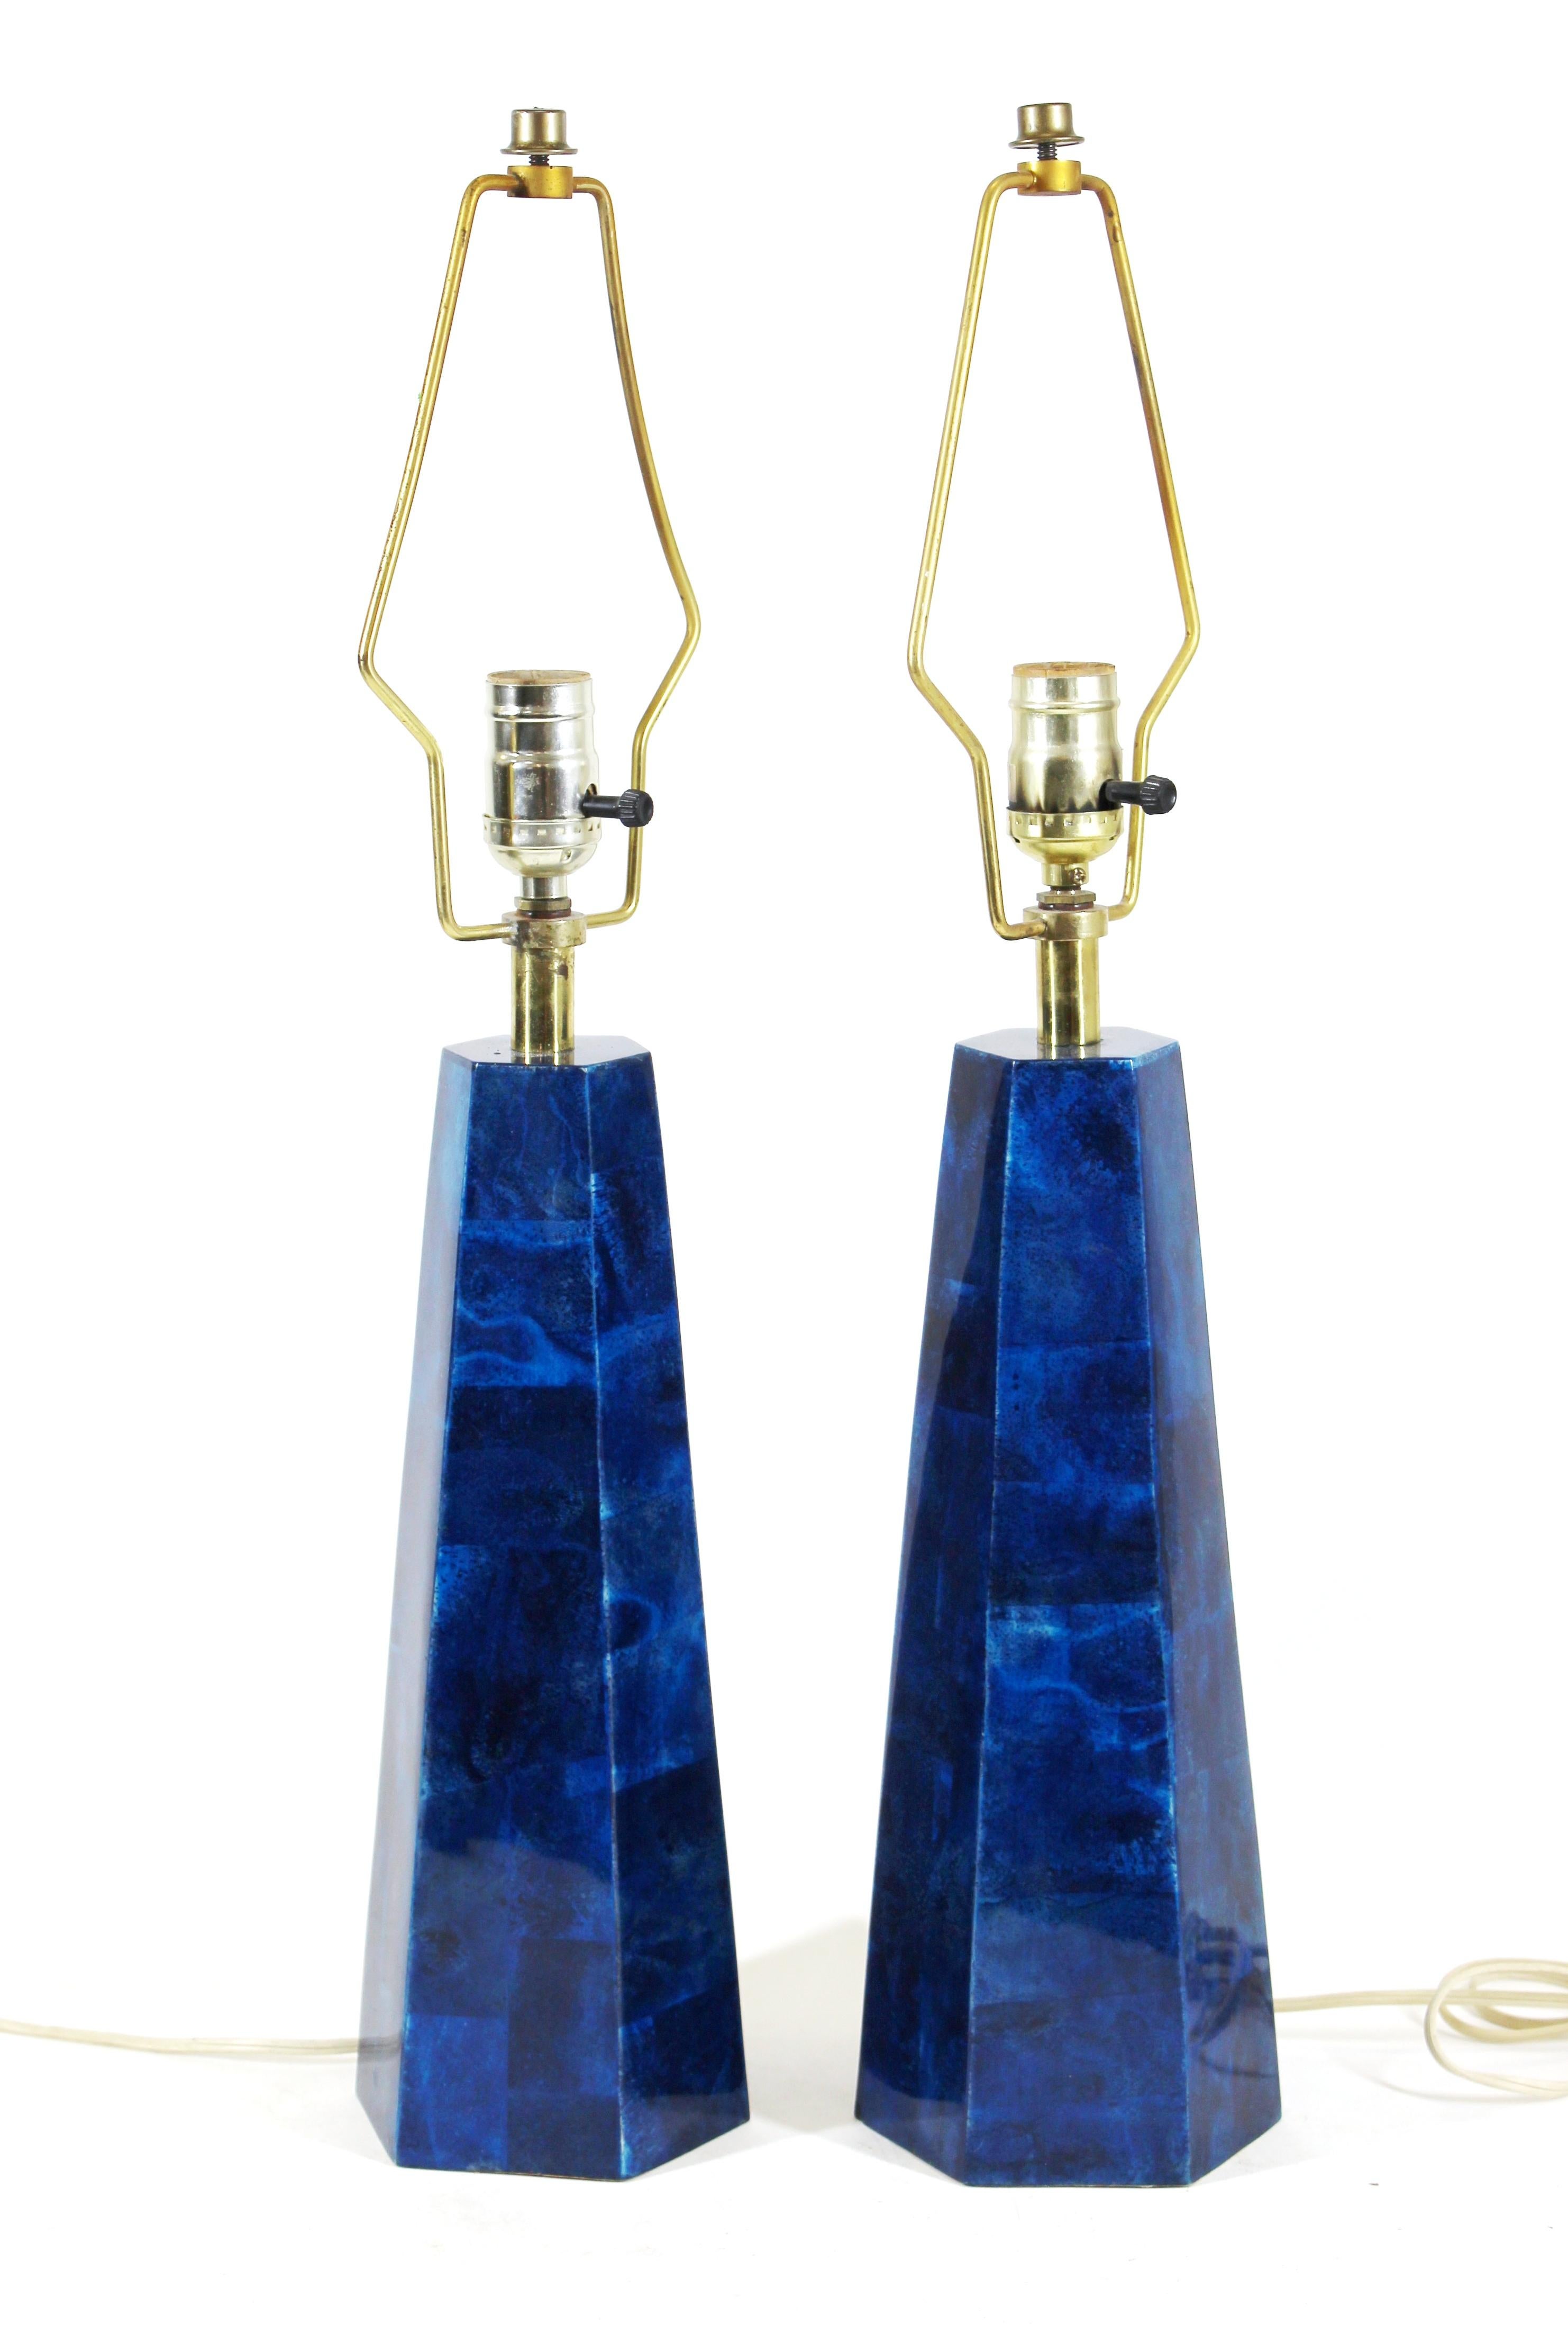 Aldo Tura attributed Italian Mid-Century Modern pair of table lamps in blue lacquered tessellated goatskin.